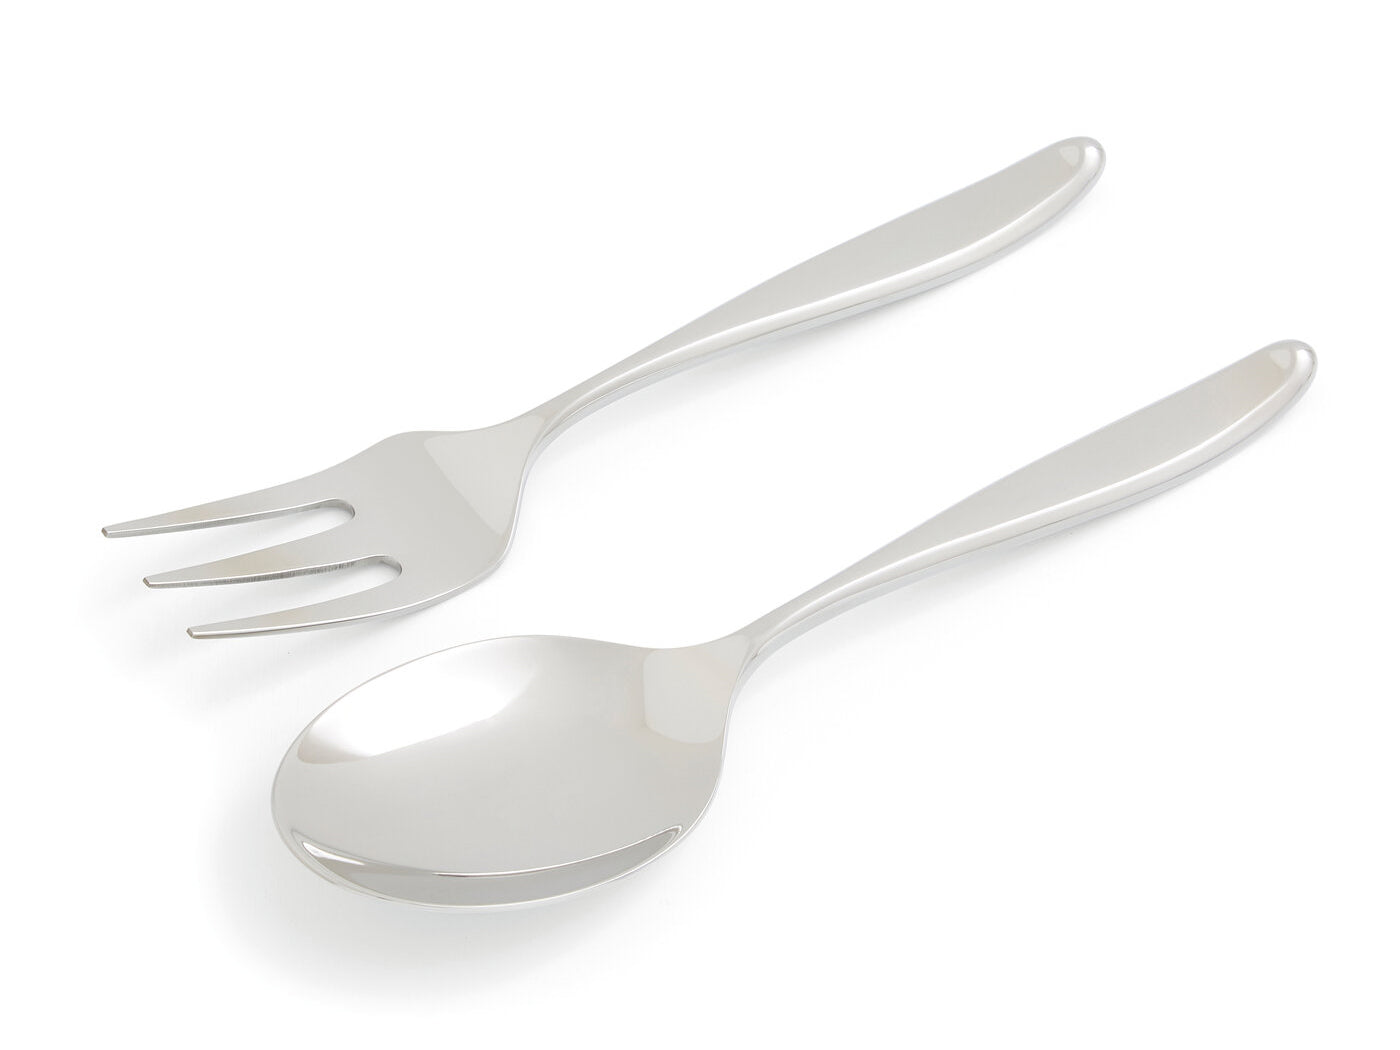 This pair of salad servers consist of a serving fork and spoon both made of stainless steel and are part of Sophie Conran's floret range. They are the perfect utensils for preparing a tossed salad.